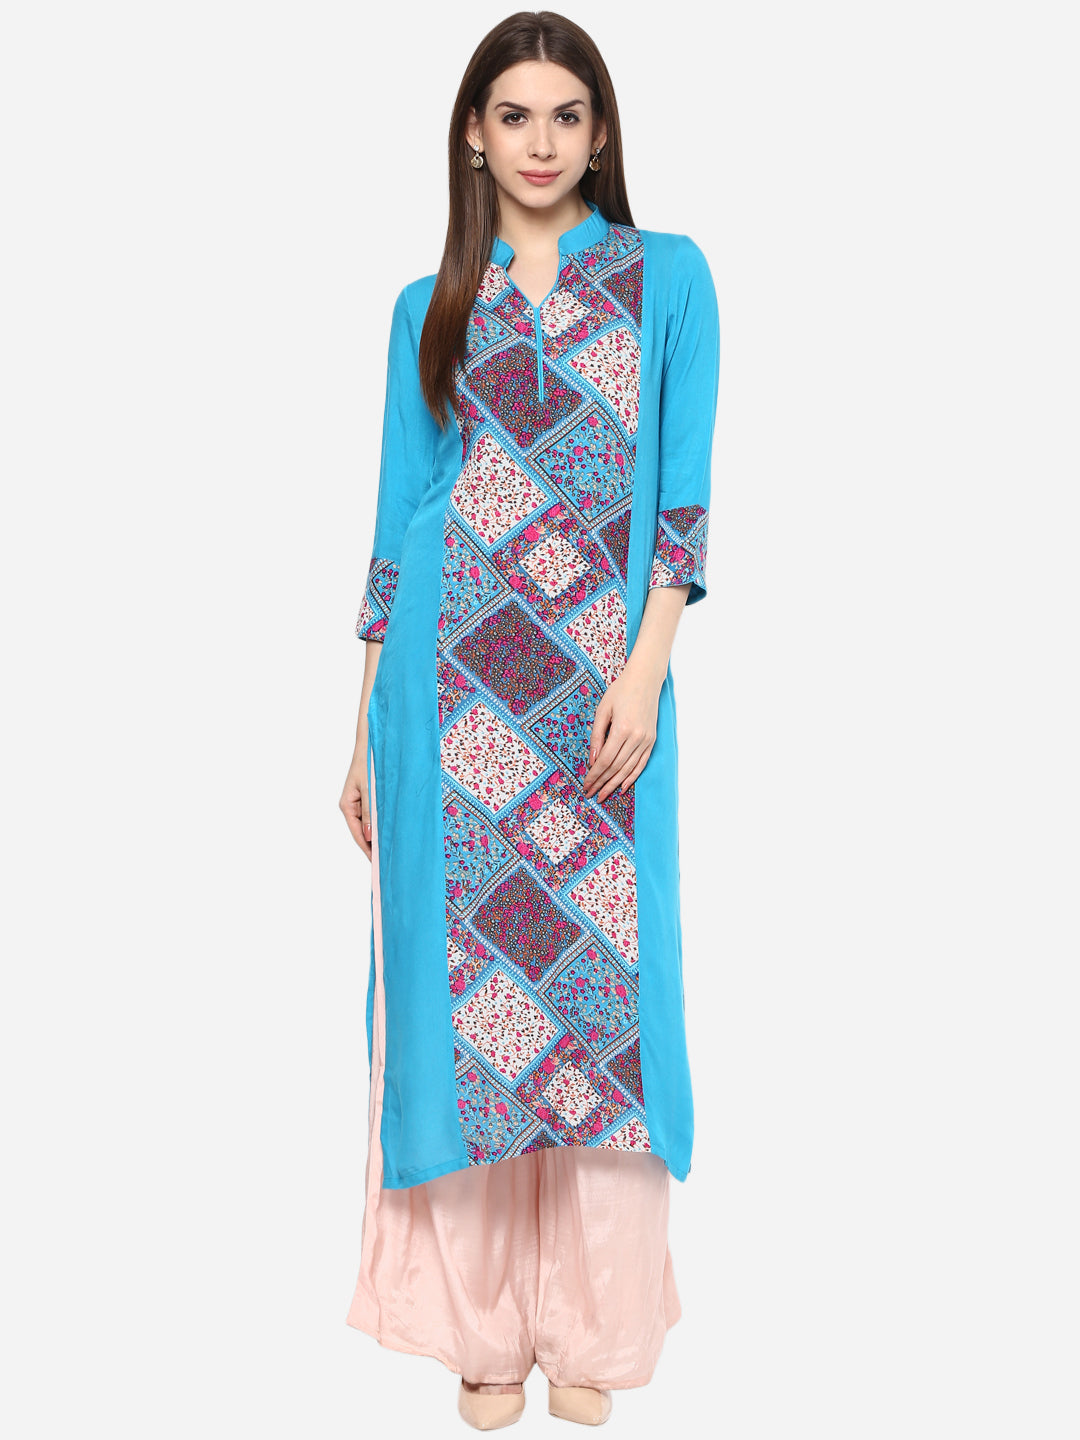 Women's Printed Turquoise and Pink Kurti